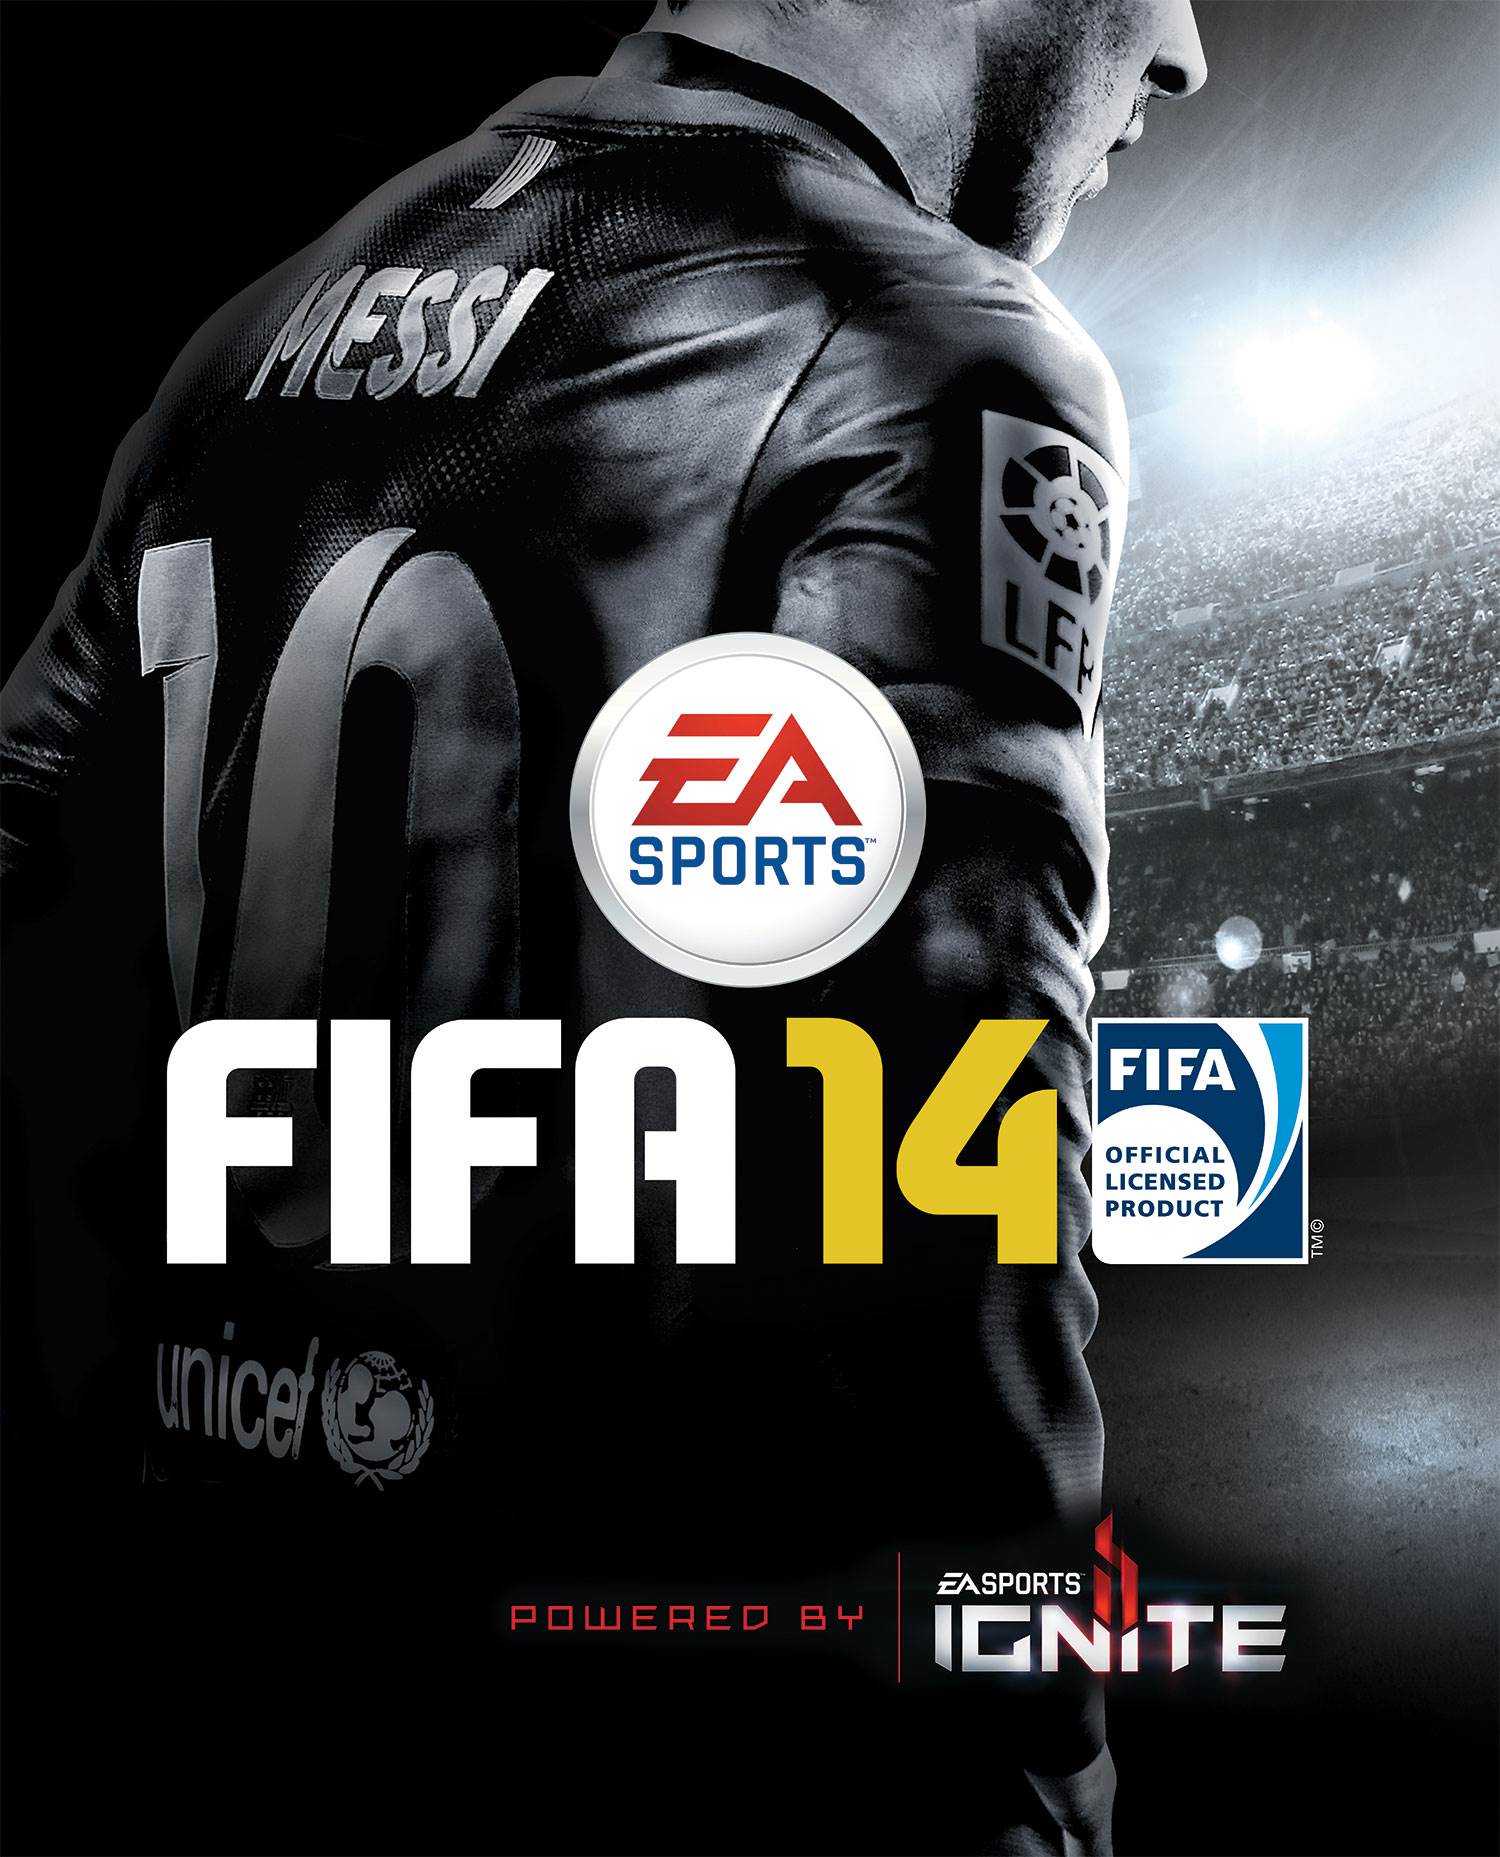 FIFA 14 WALLPAPERS IN HD « GamingBolt.com: Video Game News